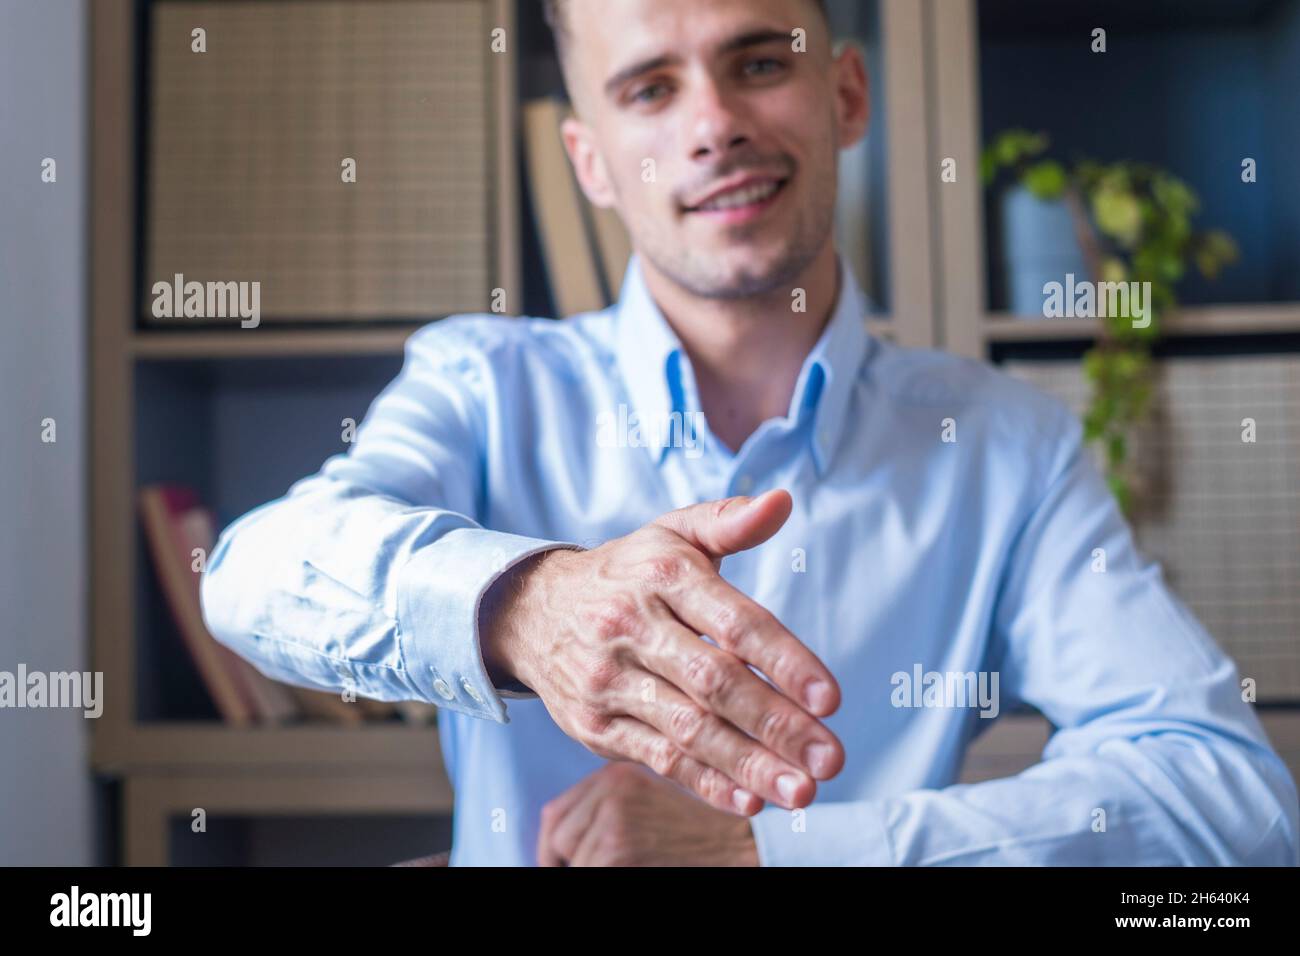 head shot portrait smiling businessman wearing glasses extending hand for handshake at camera,friendly hr manager greeting candidate on interview,offering deal,welcoming client at meeting Stock Photo